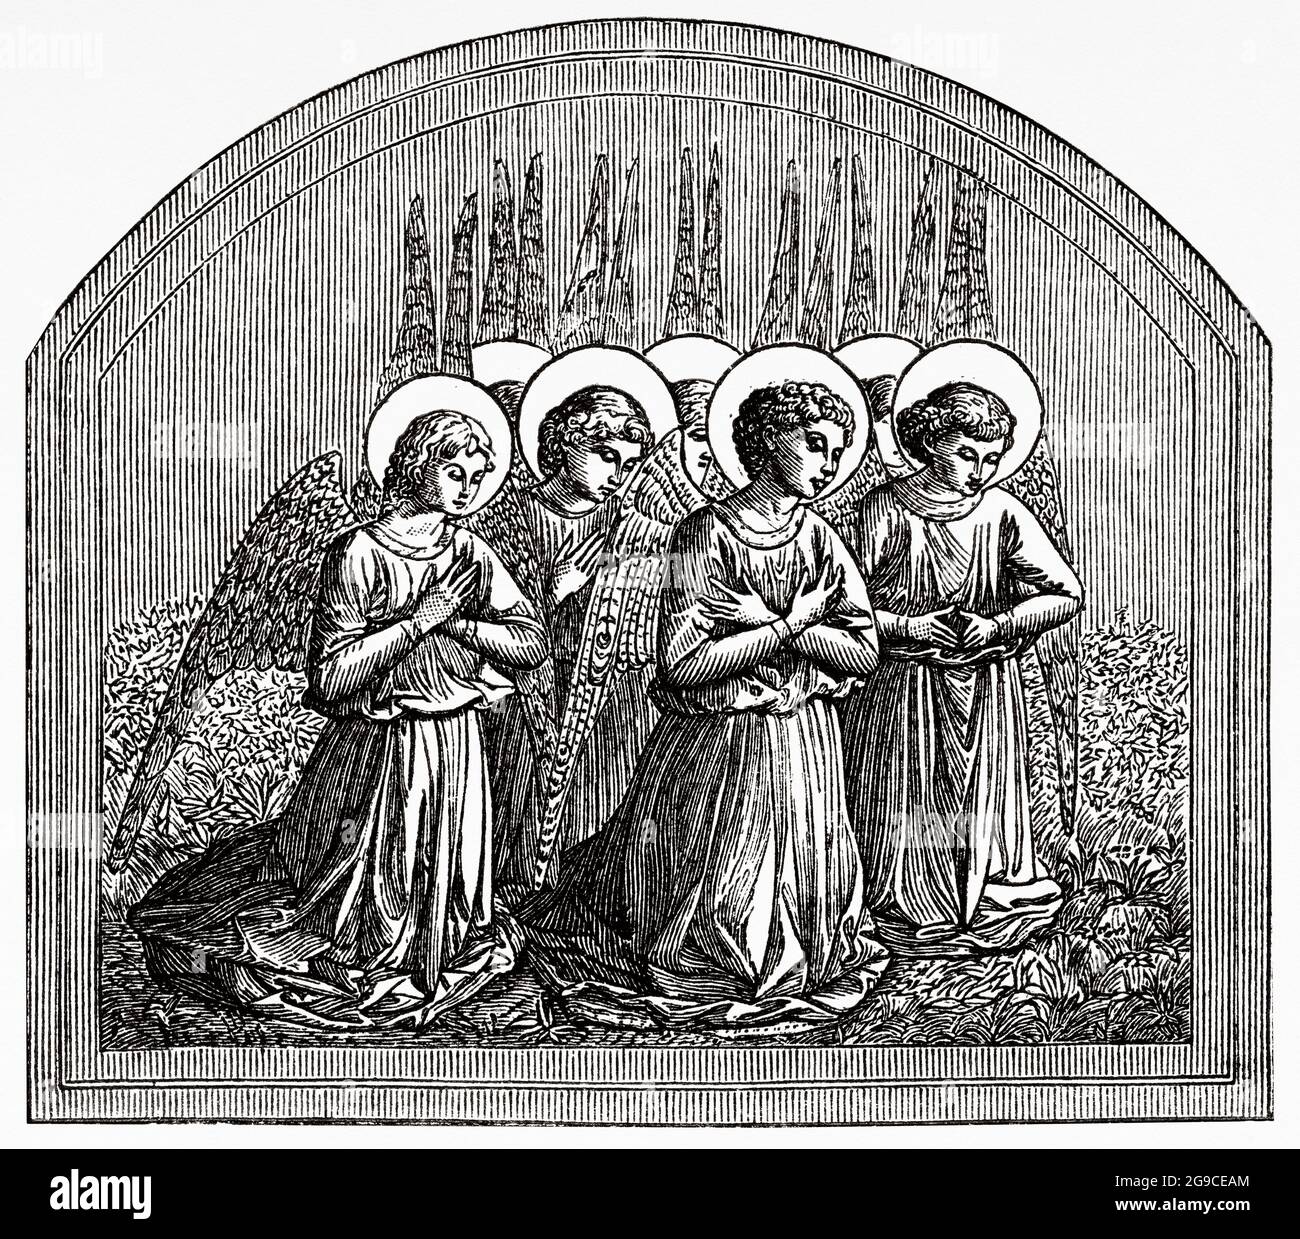 The prayer of the angels. Fresco in Palazzo Medici Riccardi by Benozzo Gozzoli. Renaissance, Florence. 15th century, Italy. Old 19th century engraved illustration from Jesus Christ by Veuillot 1881 Stock Photo